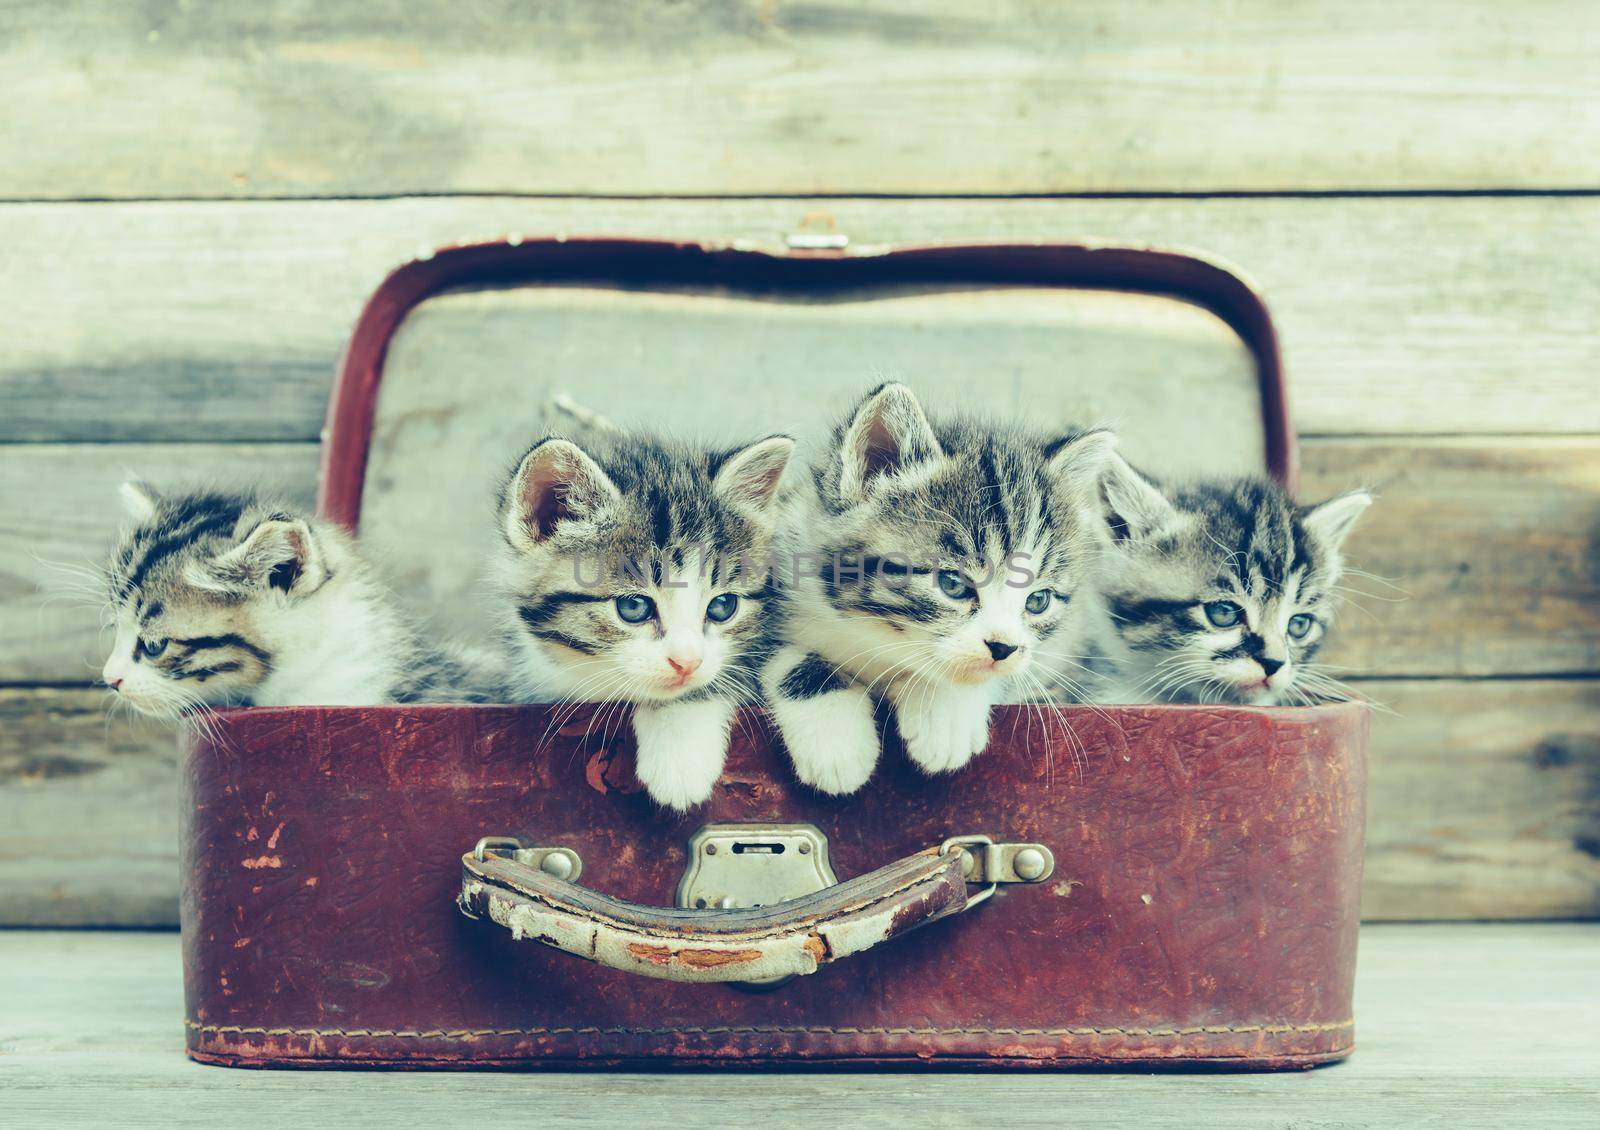 Four kittens sitting in a vintage suitcase on wooden background